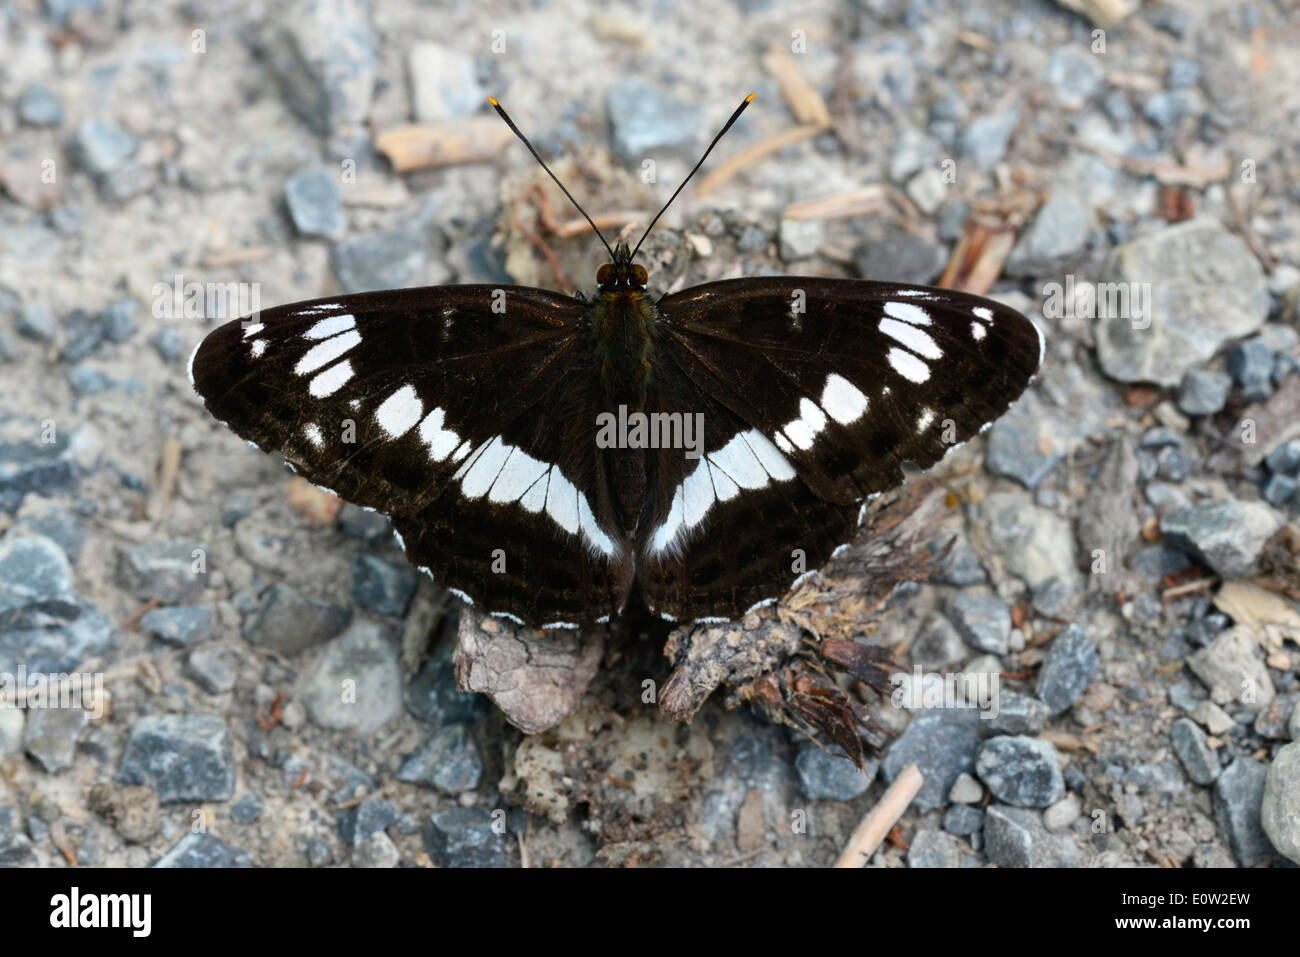 White Admiral (Limenitis camilla, Ladoga camilla). Butterfly taking up minerals from the ground. Germany Stock Photo